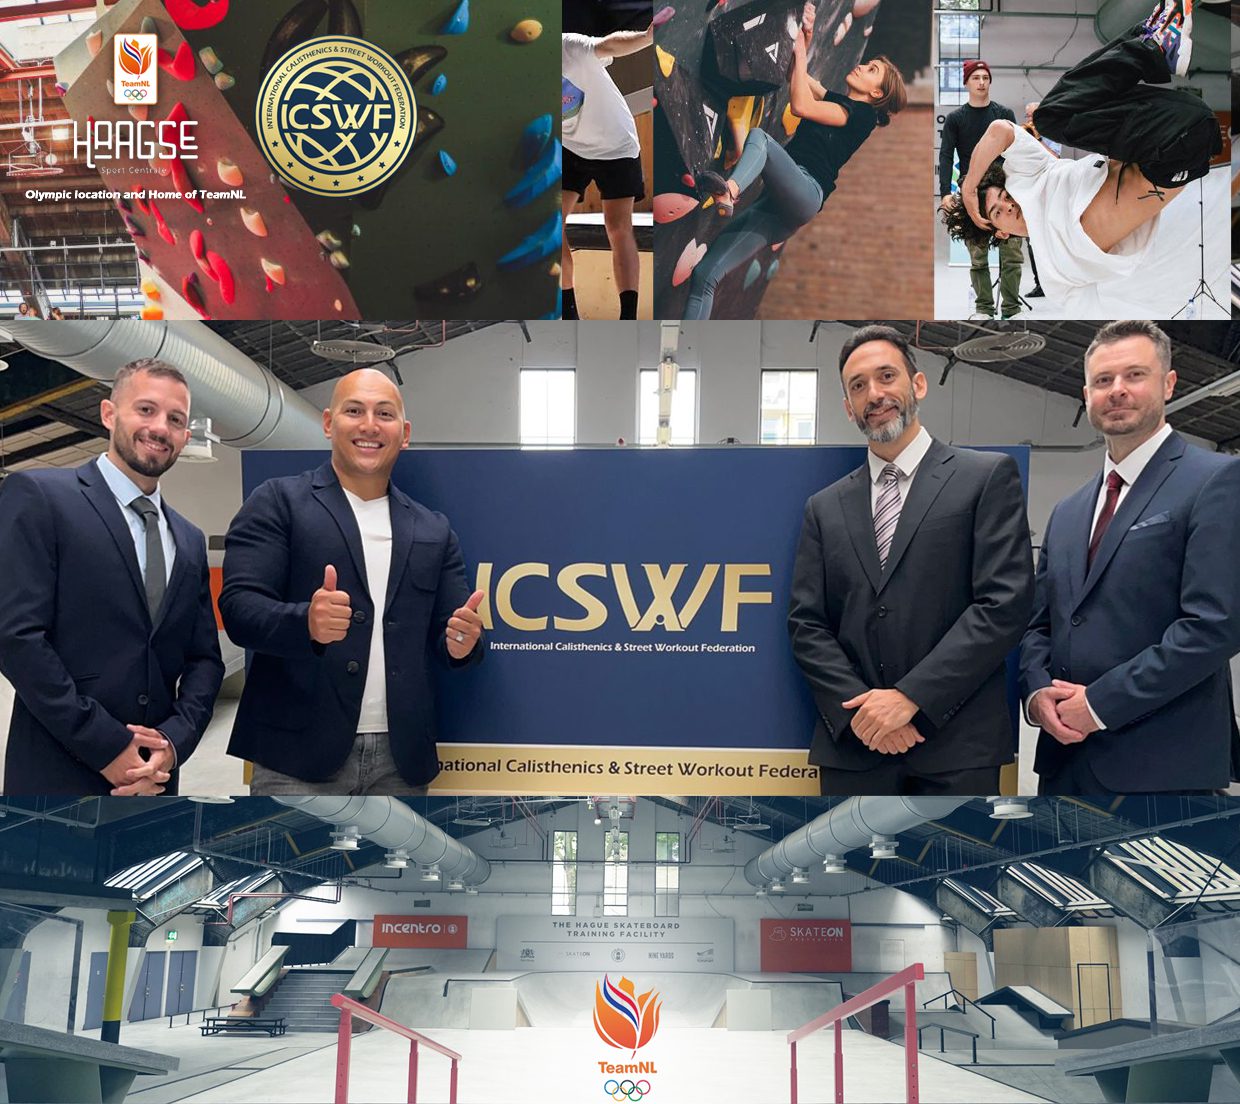 Headquarter ICSWF in Olympic location Haagse Sport Centrale